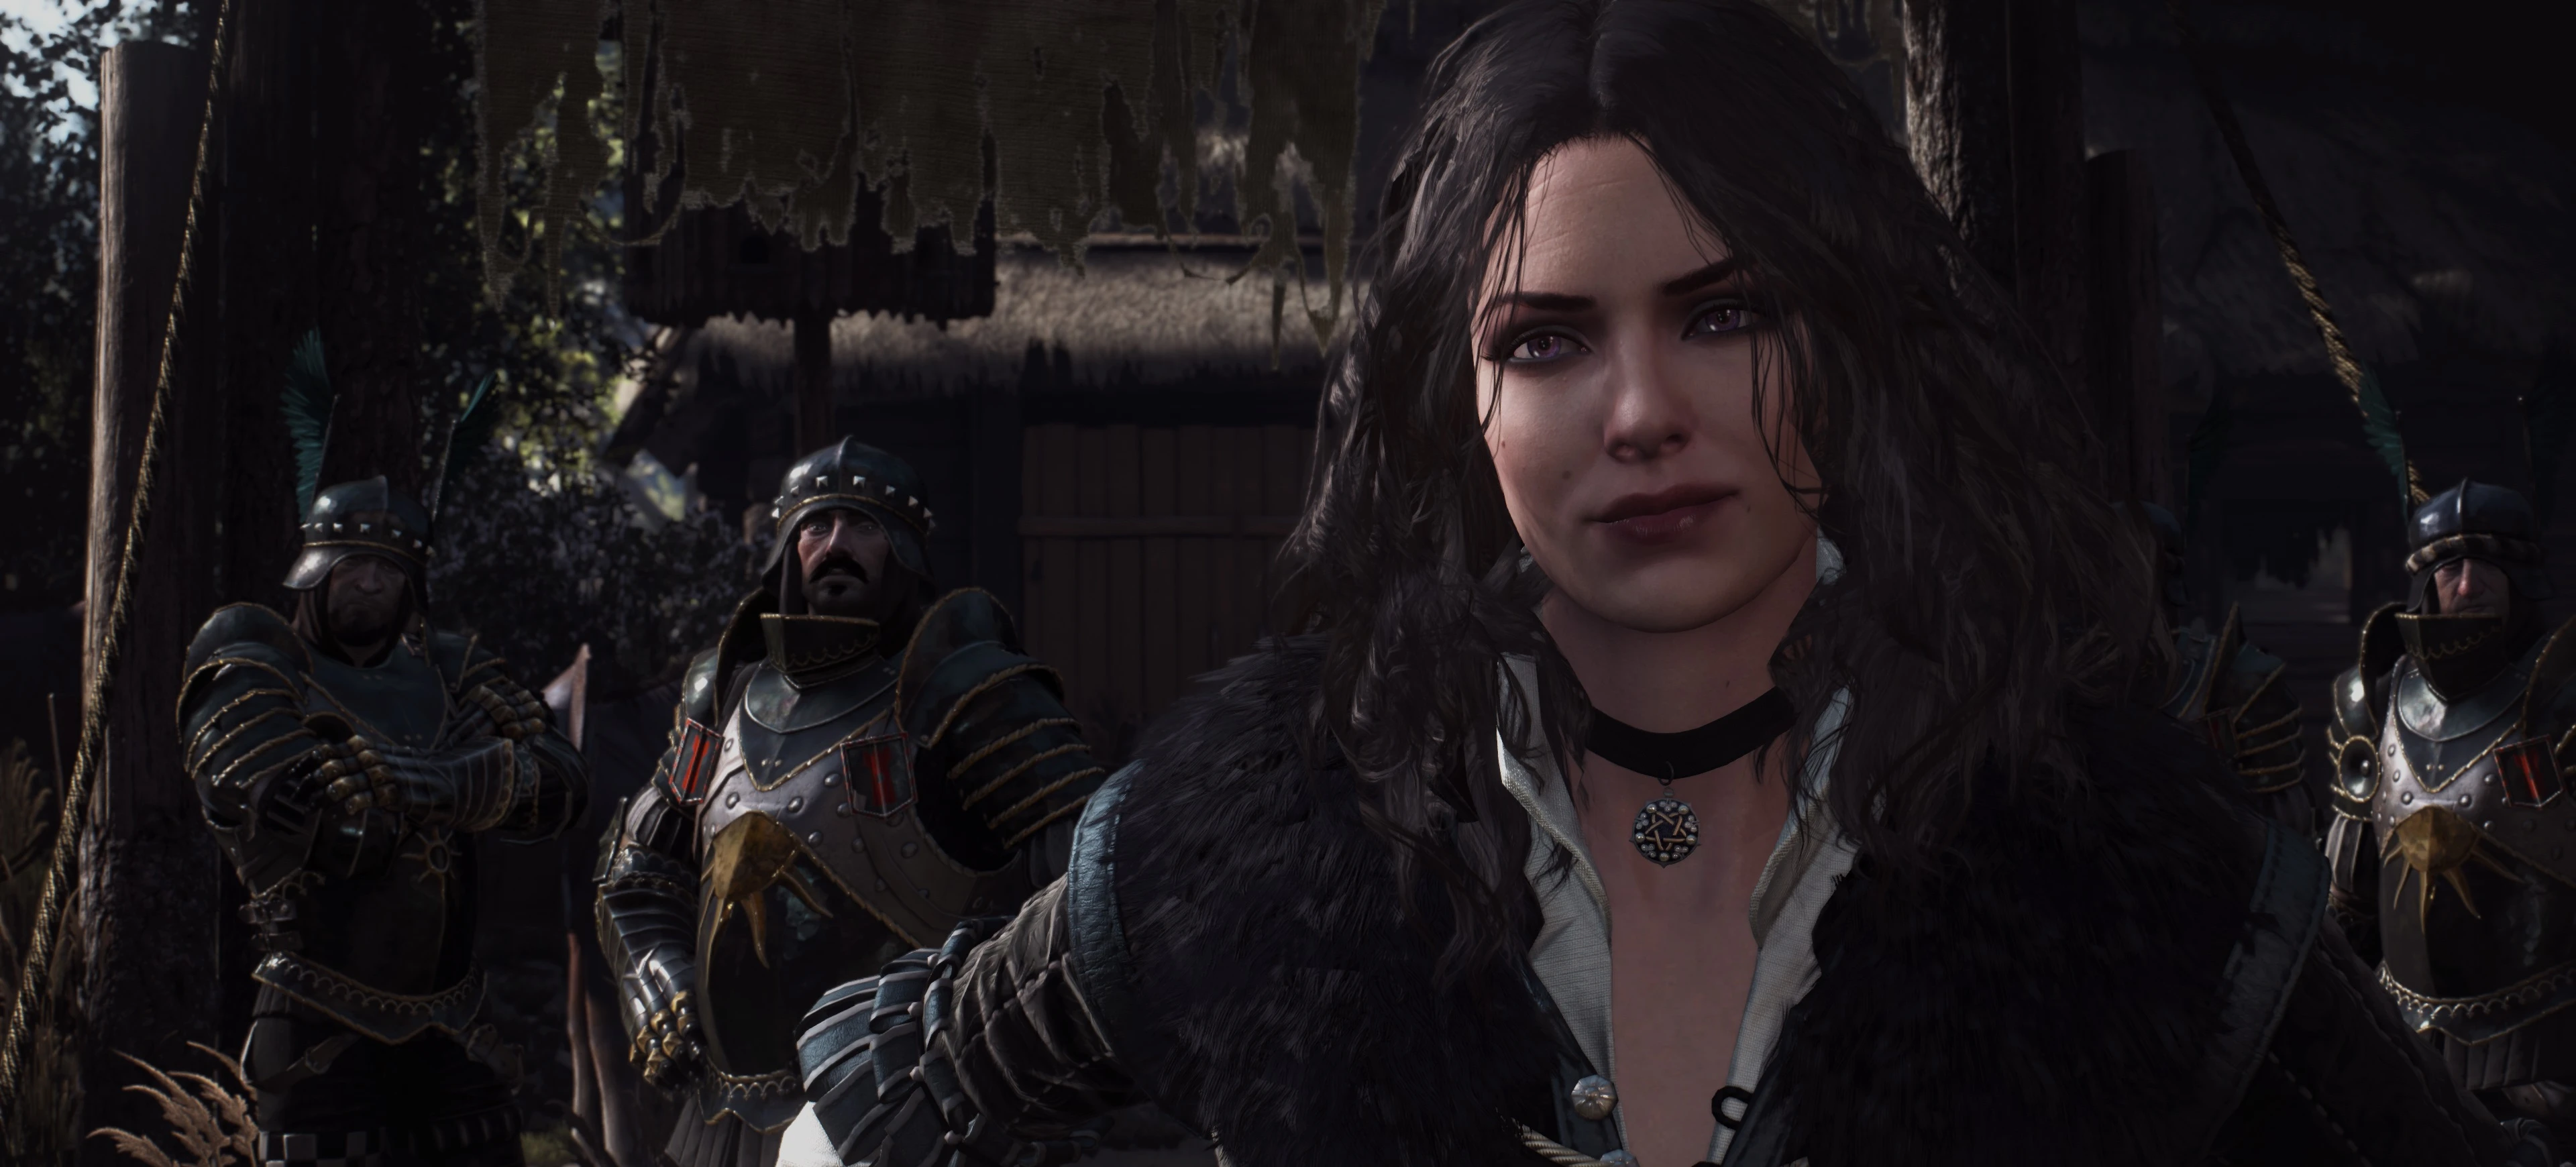 the witcher 3 mod manager